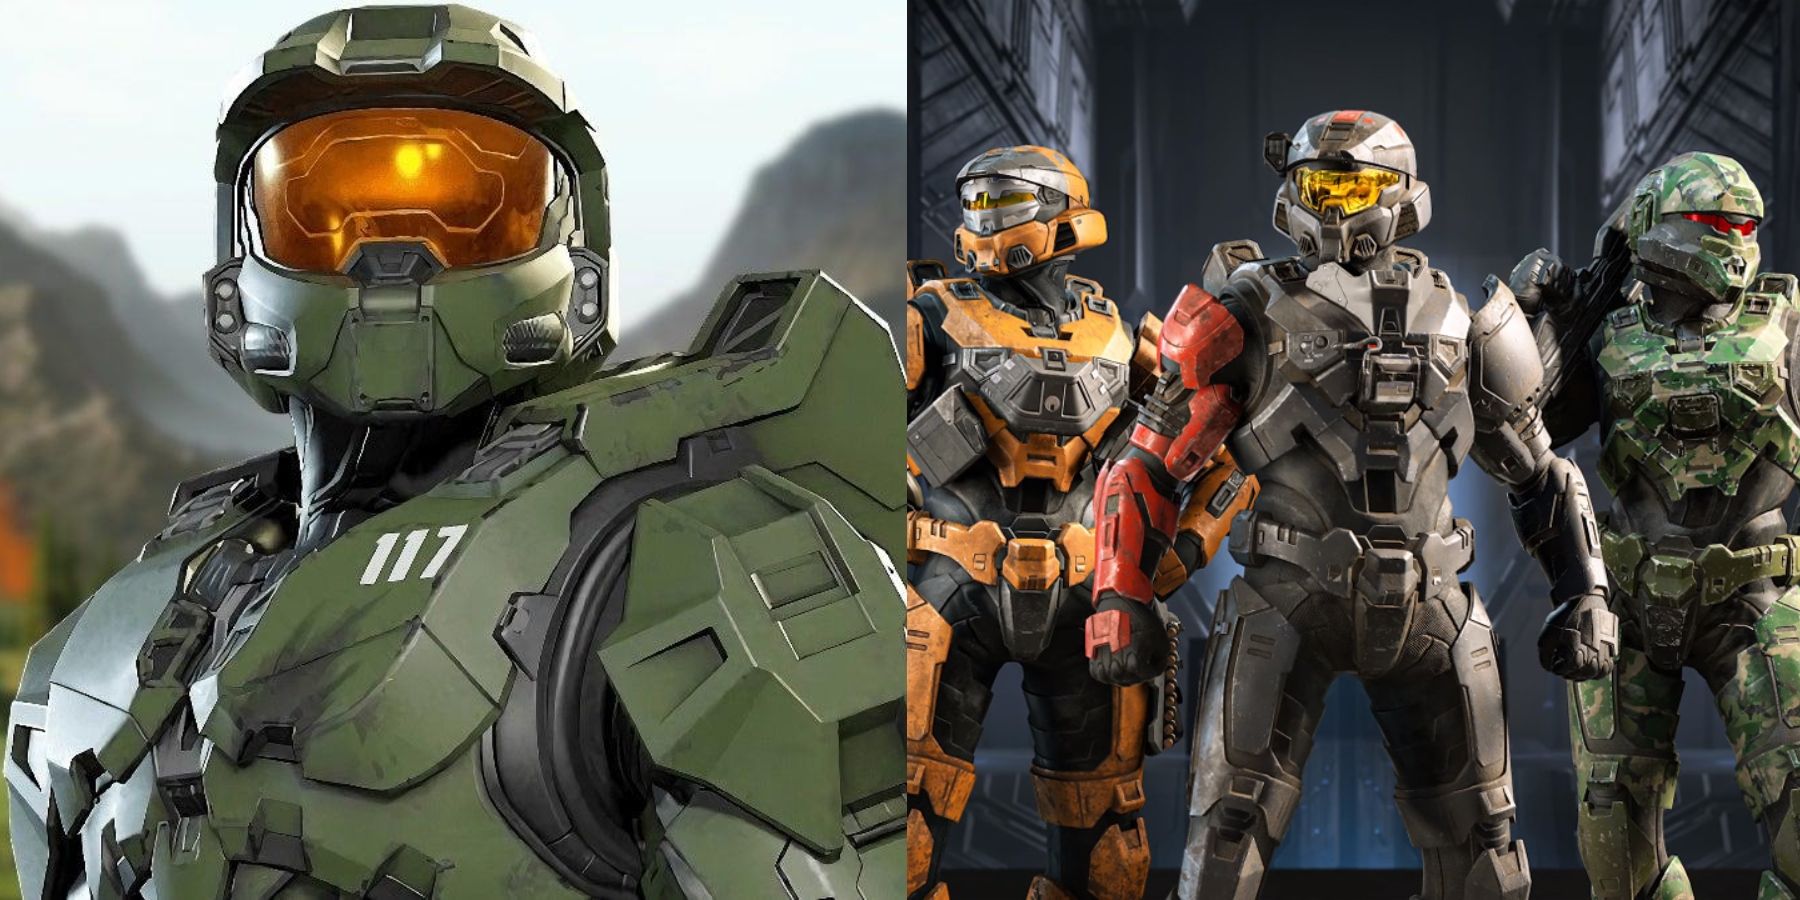 Halo Infinite Toy May Reveal Cut Content